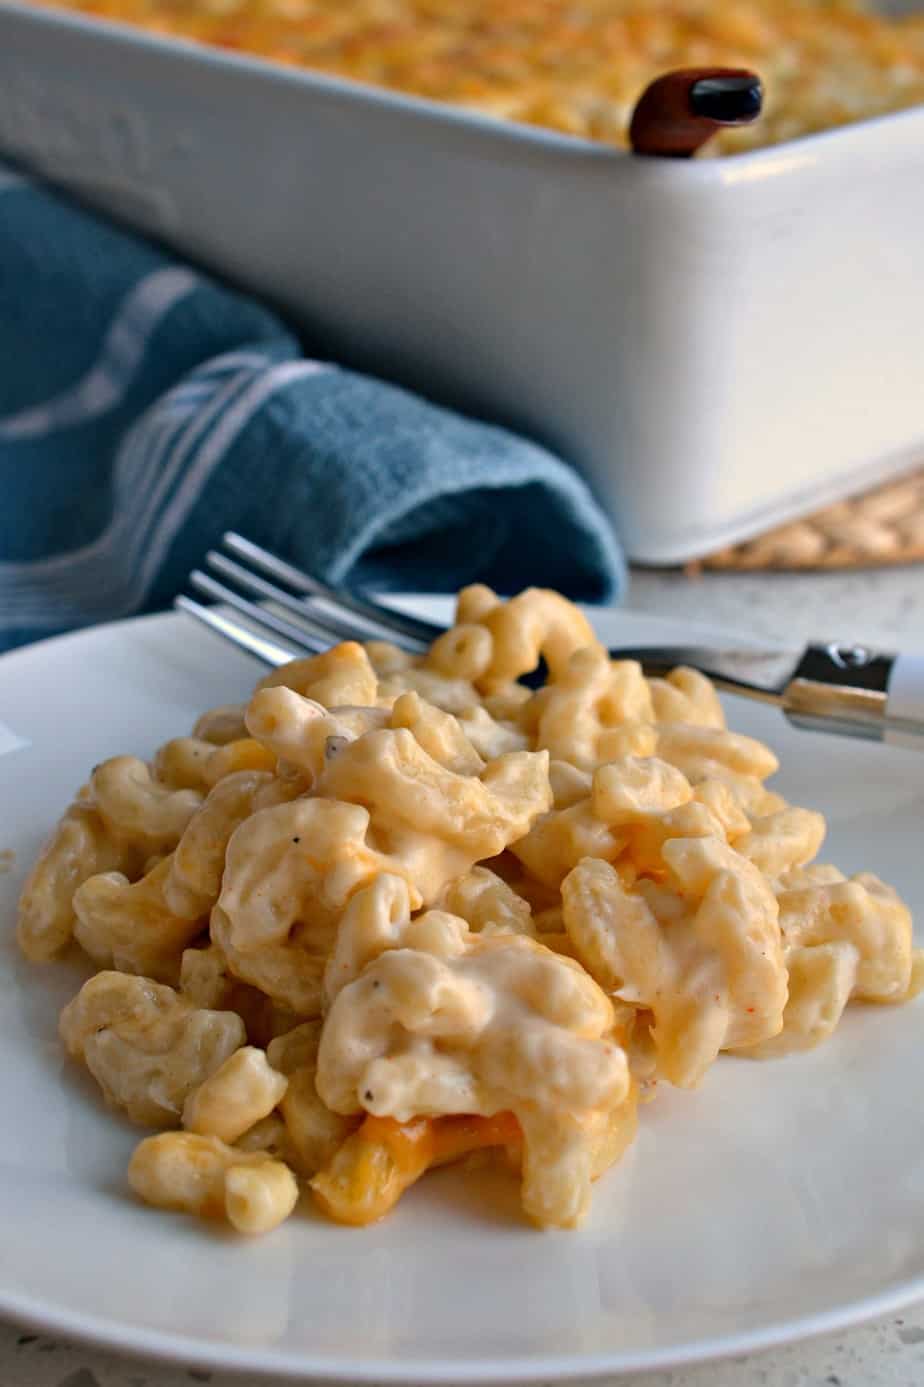 Baked Macaroni and cheese made with a winning three cheese combination of sharp cheddar, white cheddar and Gruyere cheese. 